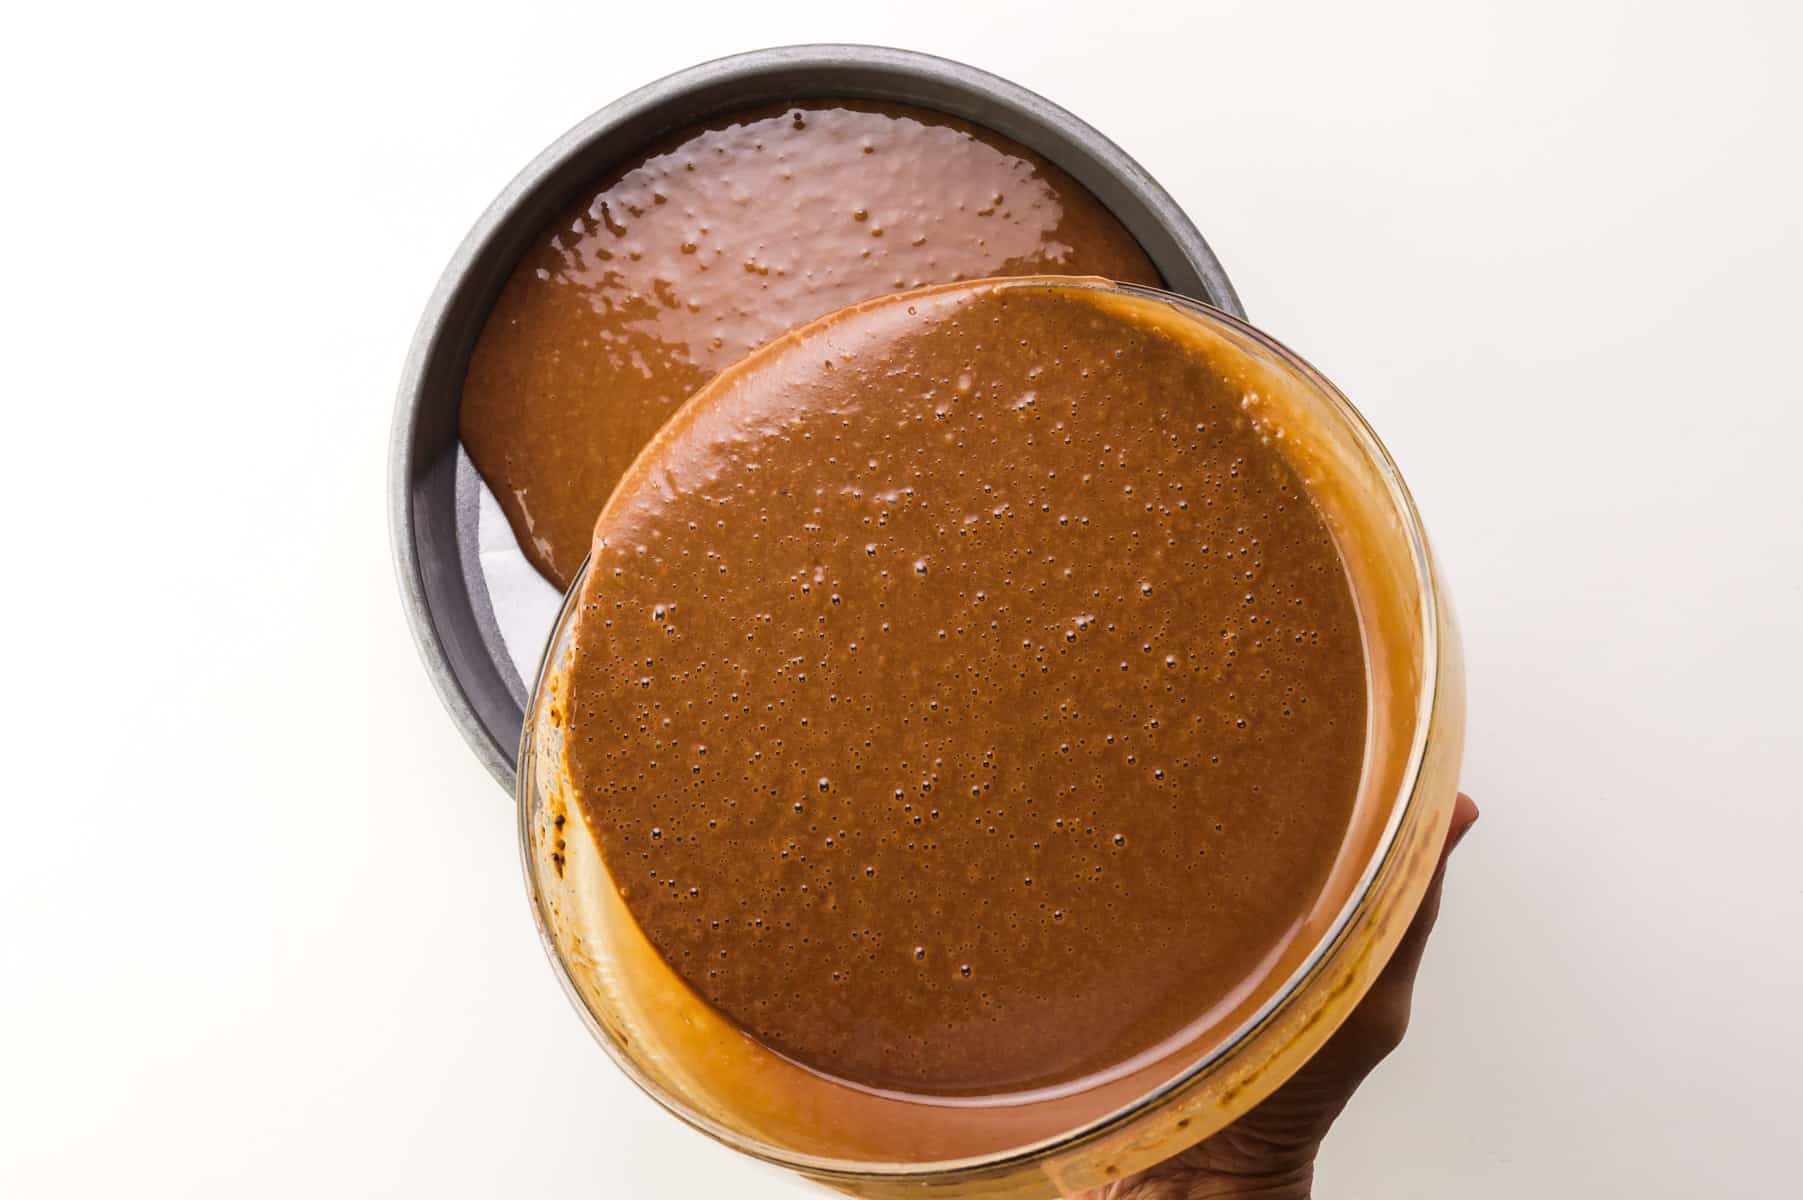 A hand holds a bowl of chocolate cake batter, pouring it into a prepared round cake pan.